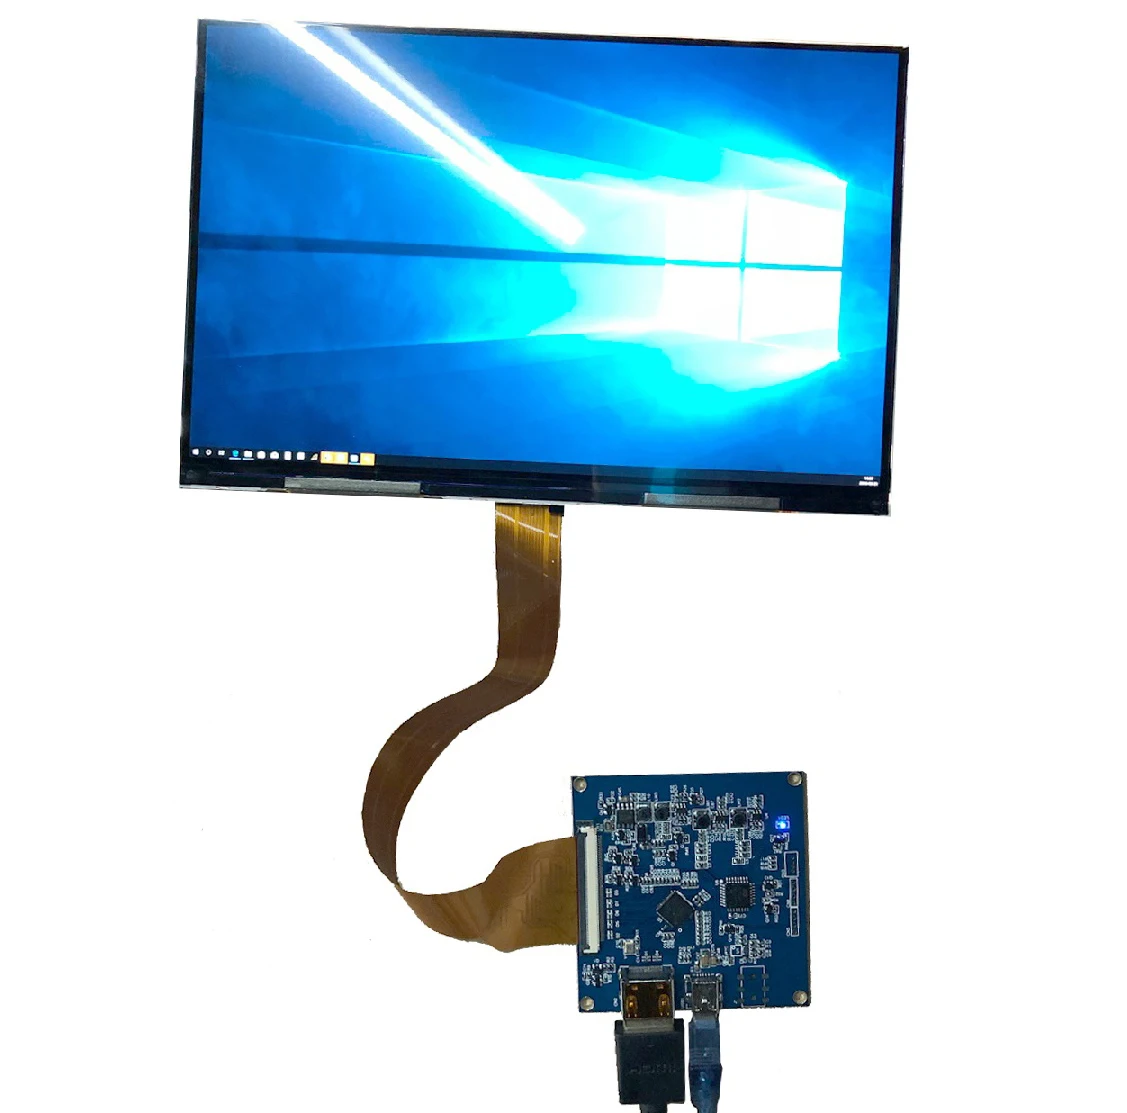 

8.9inch 2560X1600 IPS LCD LED Panel Screen TFTMD089030 2K + HDMI-compatible To MIPI Controller Board Kit diy for 3D printer